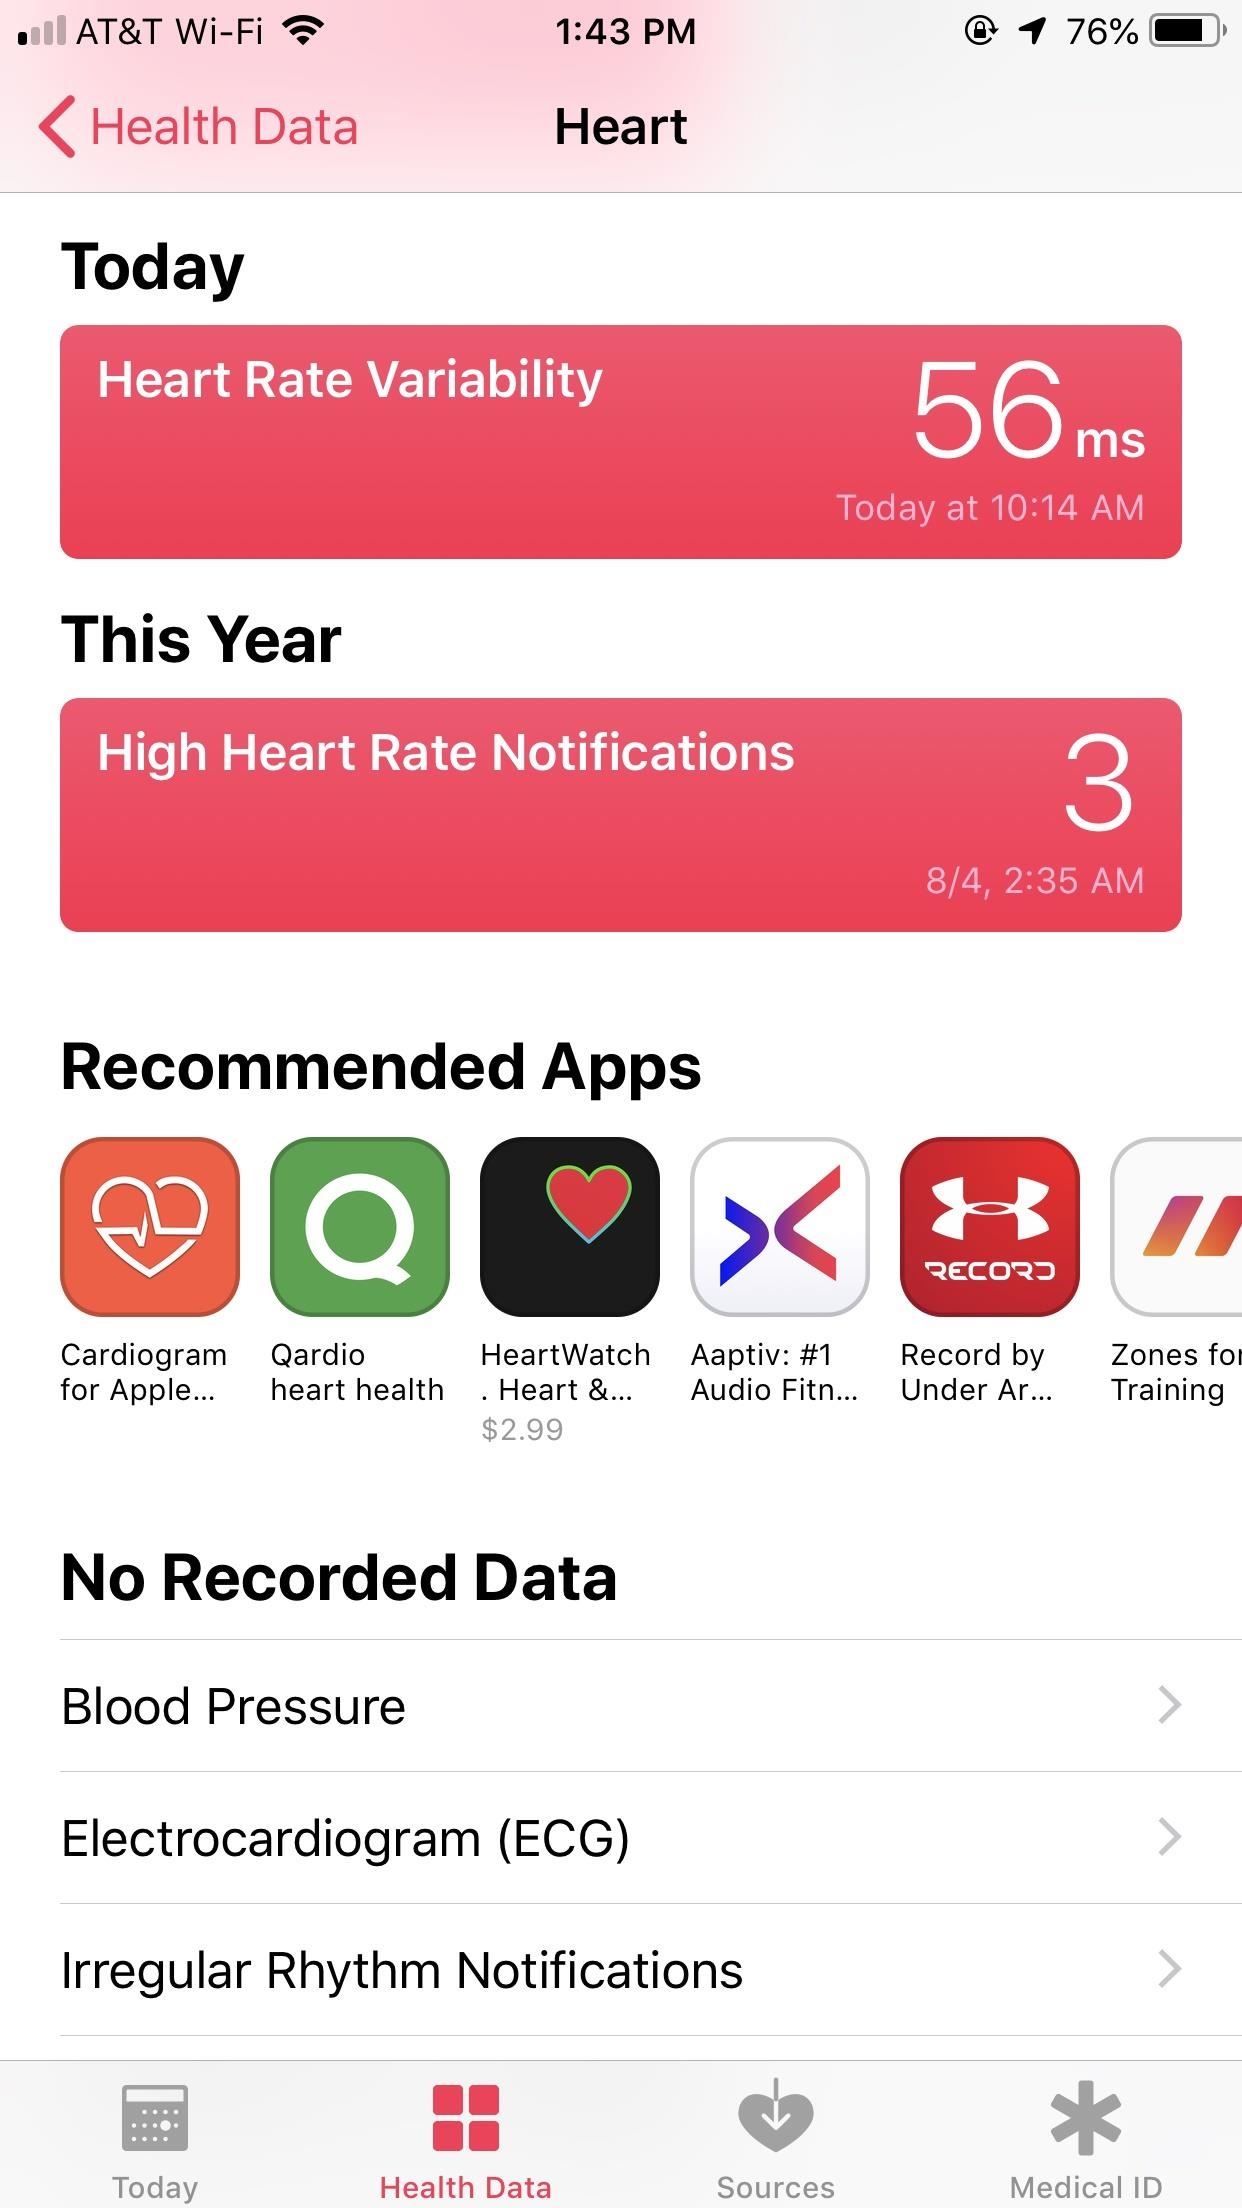 High Heart Rate Warning on Your Apple Watch? Here's What That Means